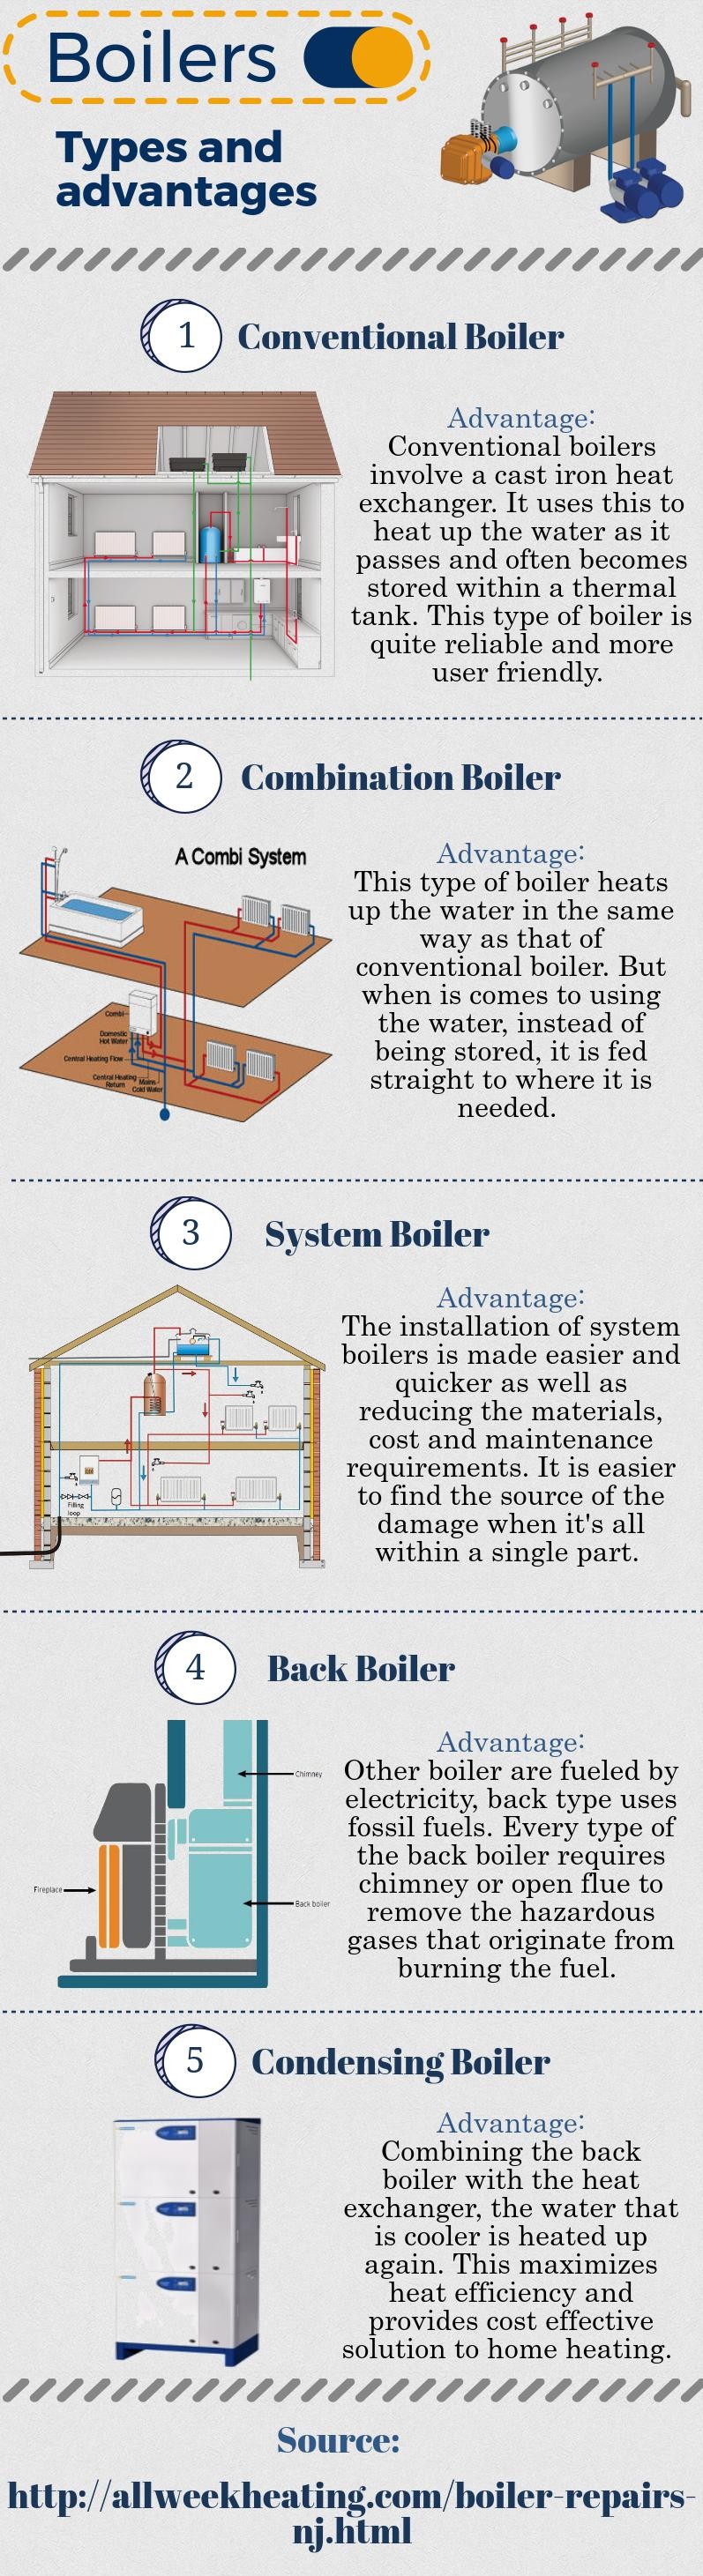 Boilers- Types And Advantages